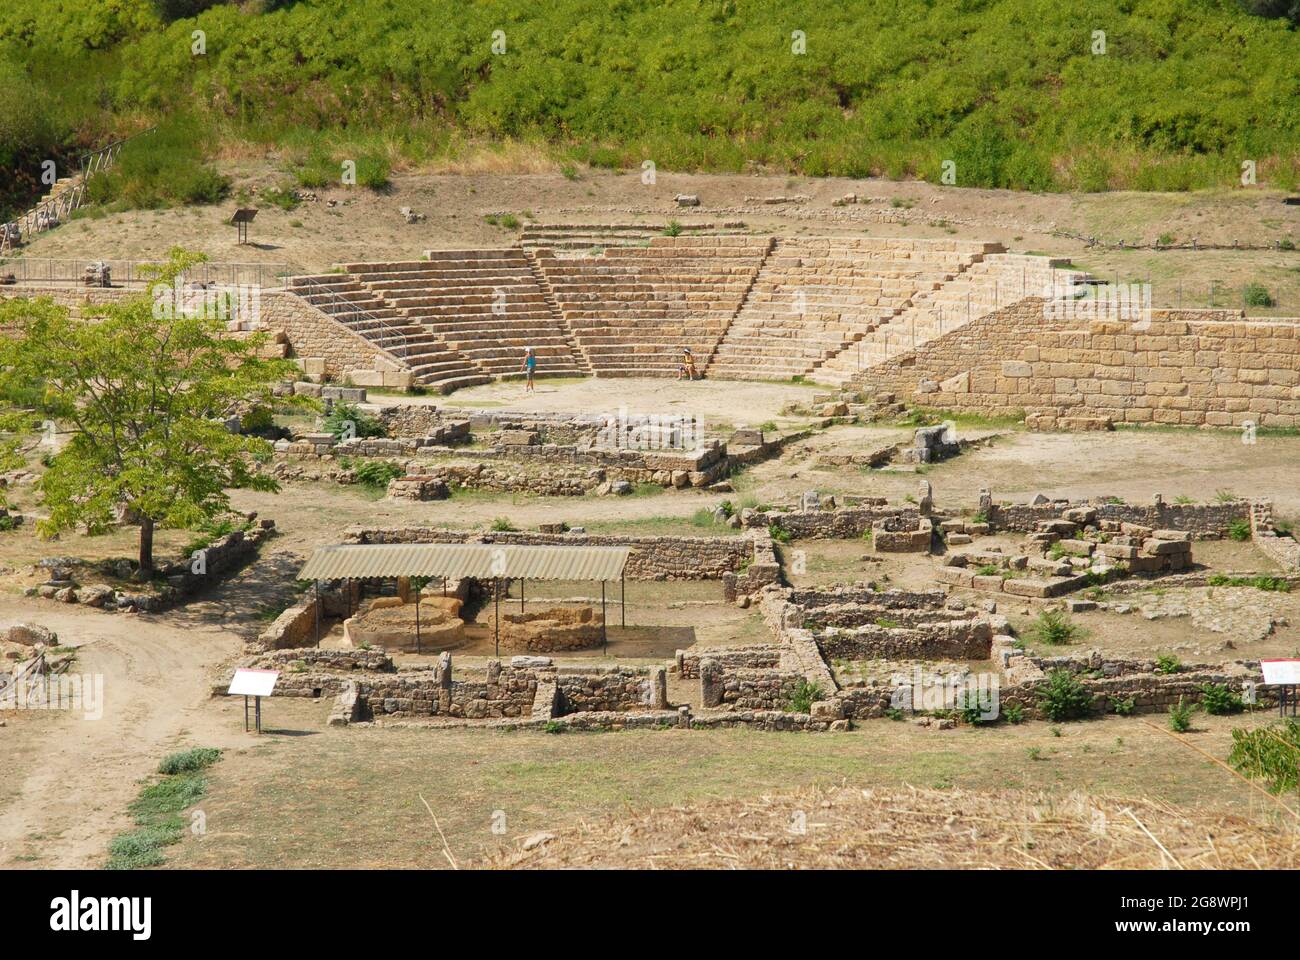 View of the Roman archaeological site of Morgantina, in the interior of Sicily in Italy. Stock Photo